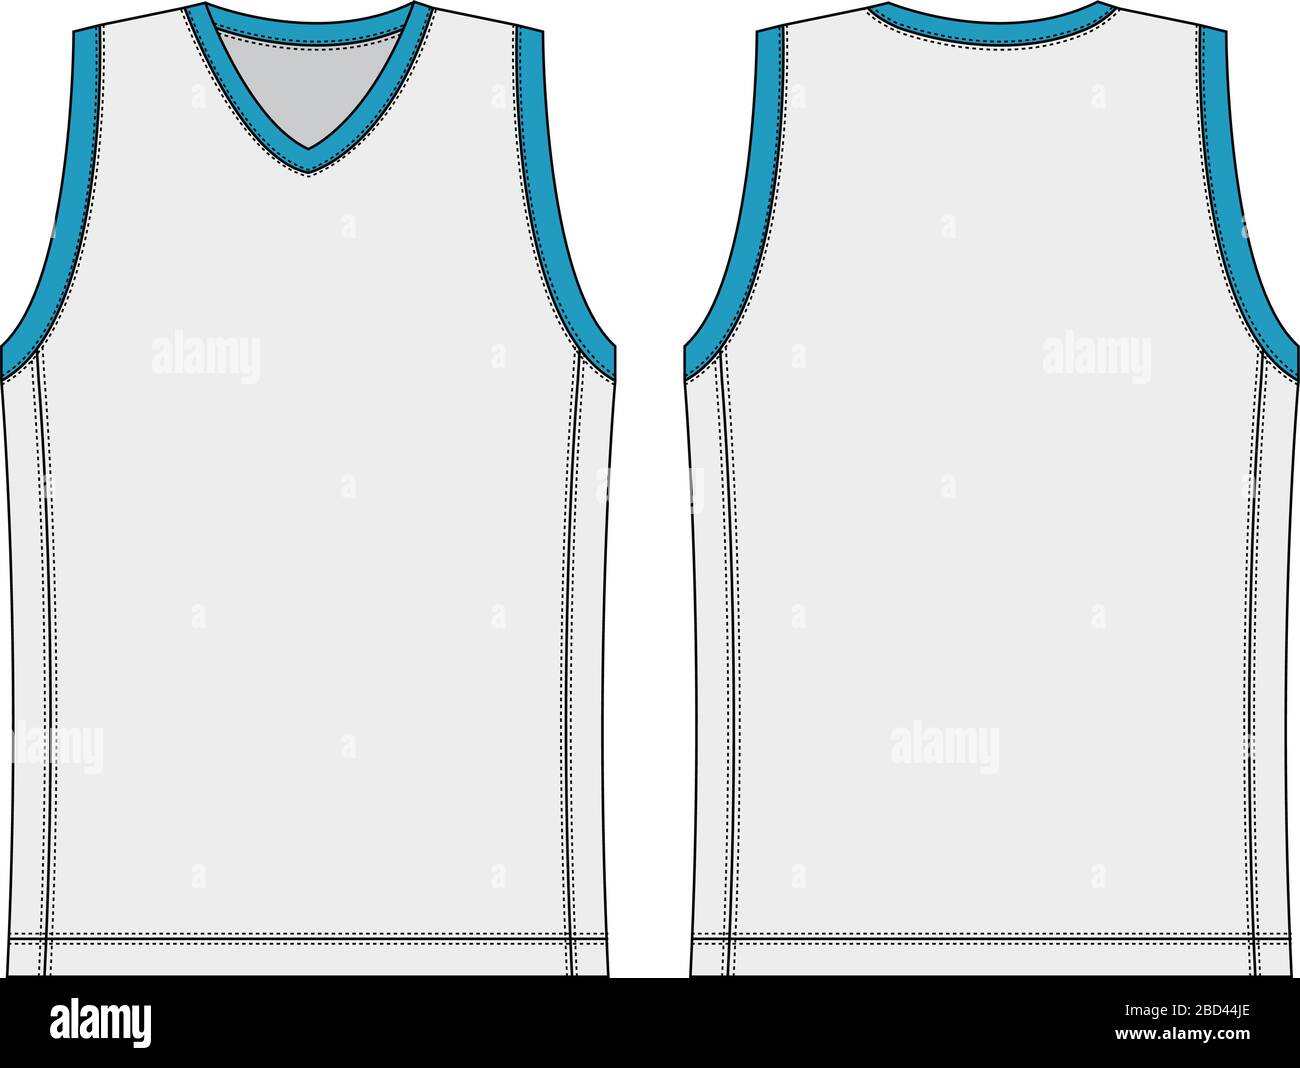 Tank Top/Basketball Uniform Template Illustration Royalty Free SVG,  Cliparts, Vectors, and Stock Illustration. Image 123849087.